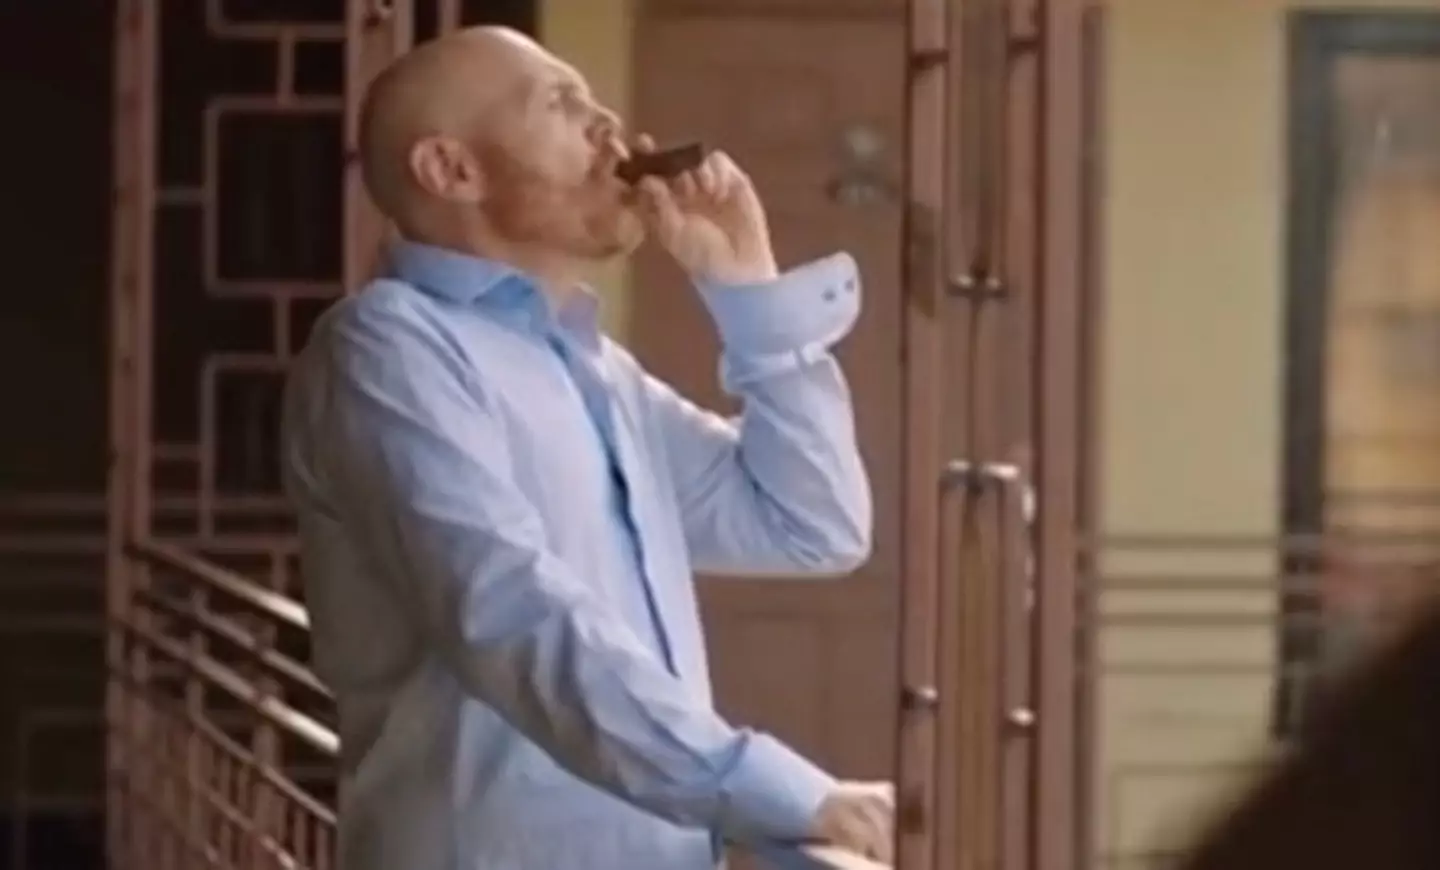 Bill Burr called out people who don't think vaping is the same as smoking in the film.